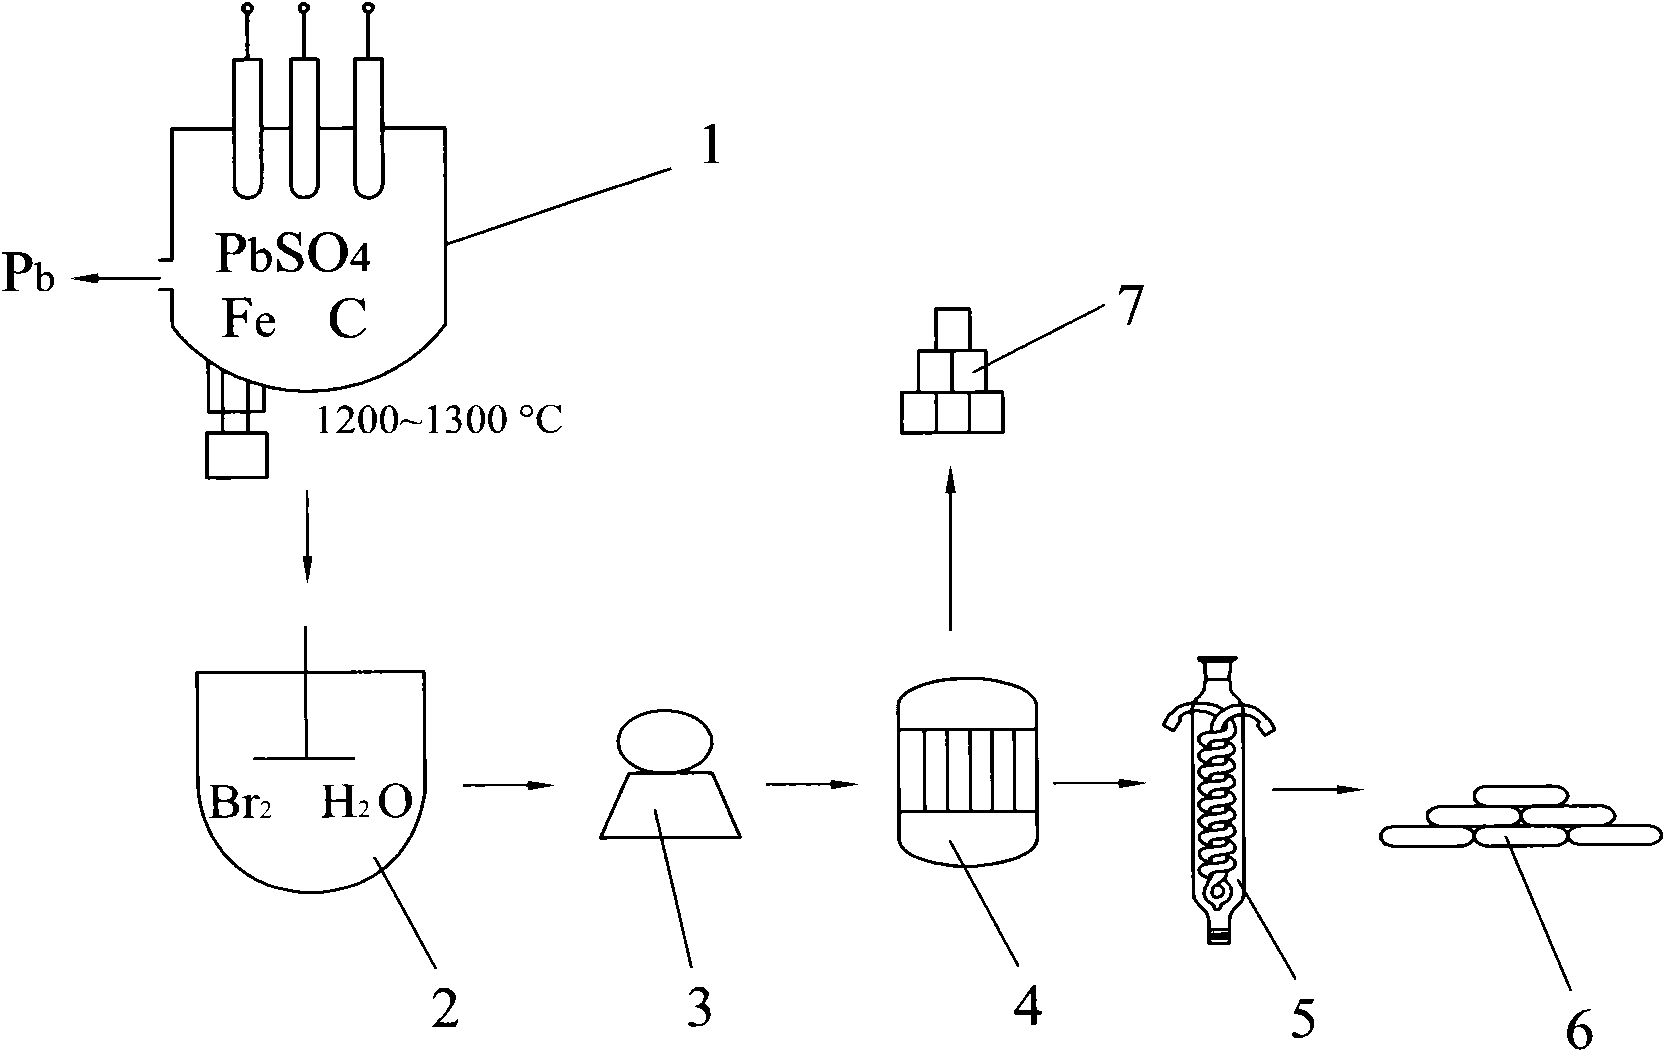 Method for preparing sulfuric acid and hydrogen bromide from sulfur dioxide waste gas